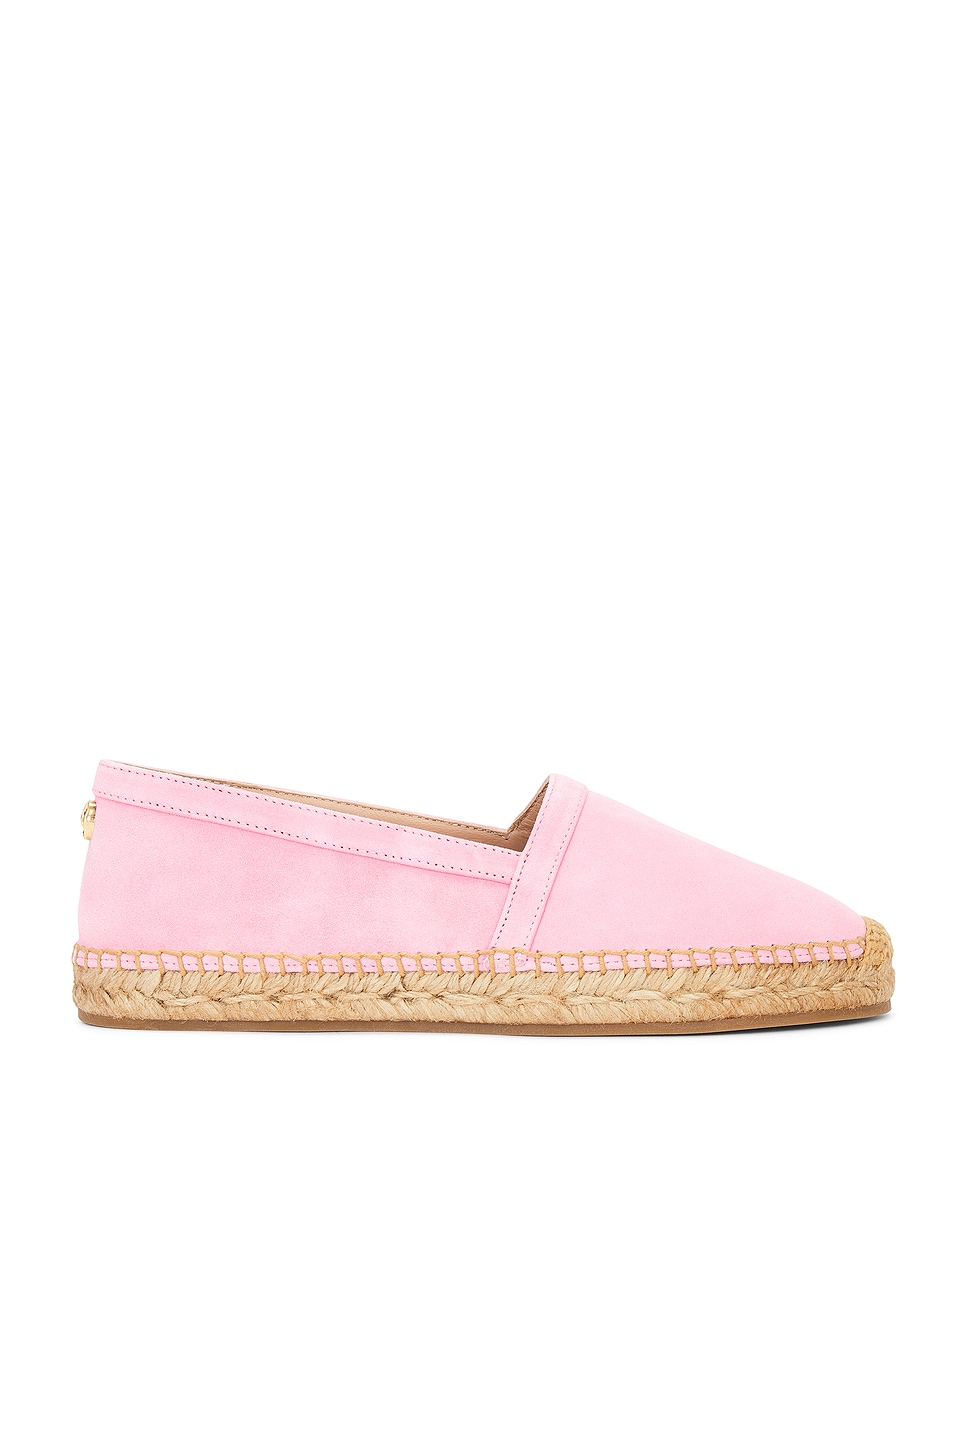 Image 1 of Bally Udeah Espadrille in Taffy